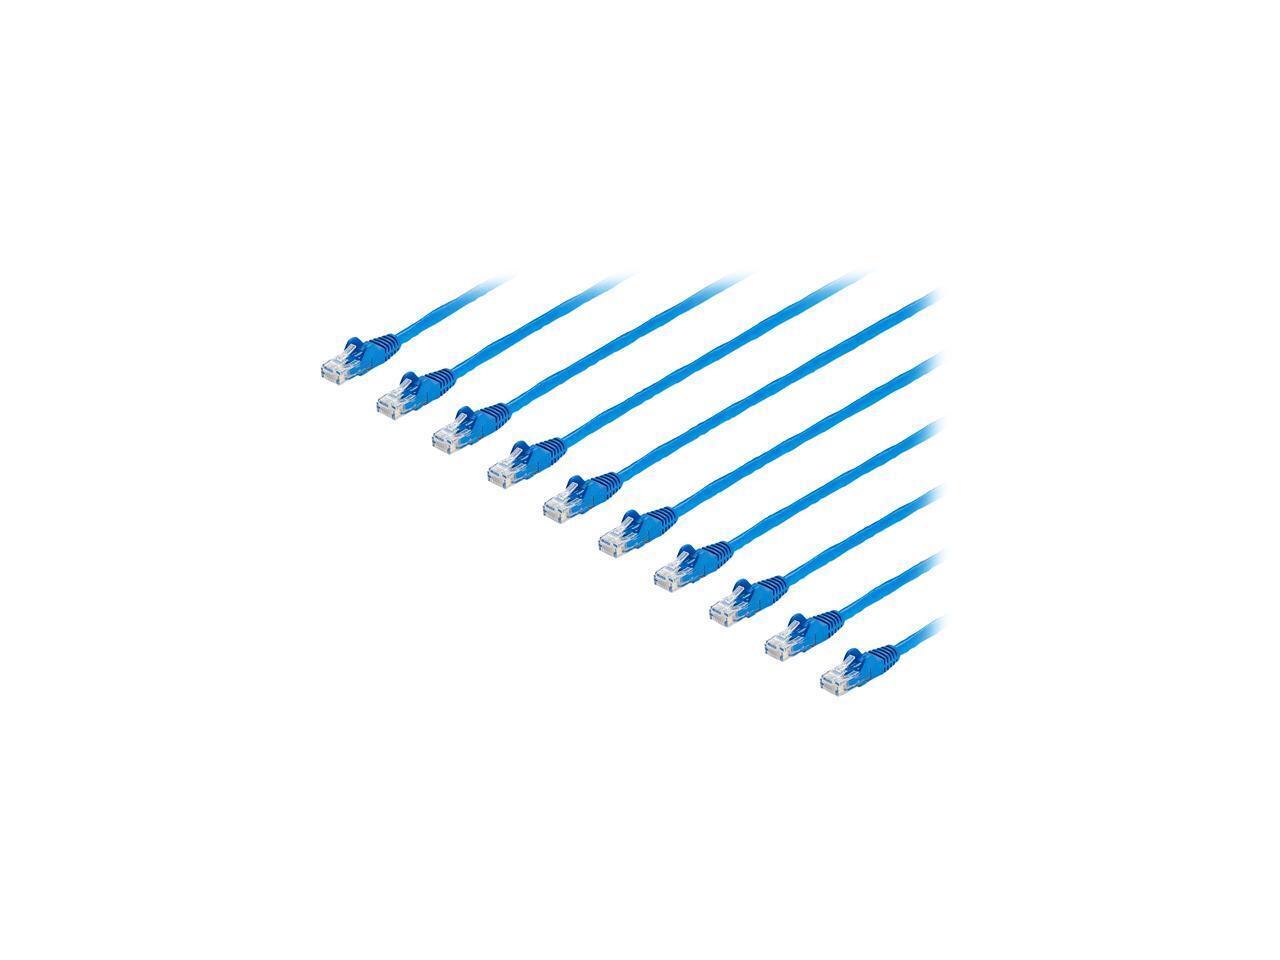 StarTech.com 3 ft. CAT6 Cable 10 Pack - Blue CAT6 Patch Cord - Snagless RJ45